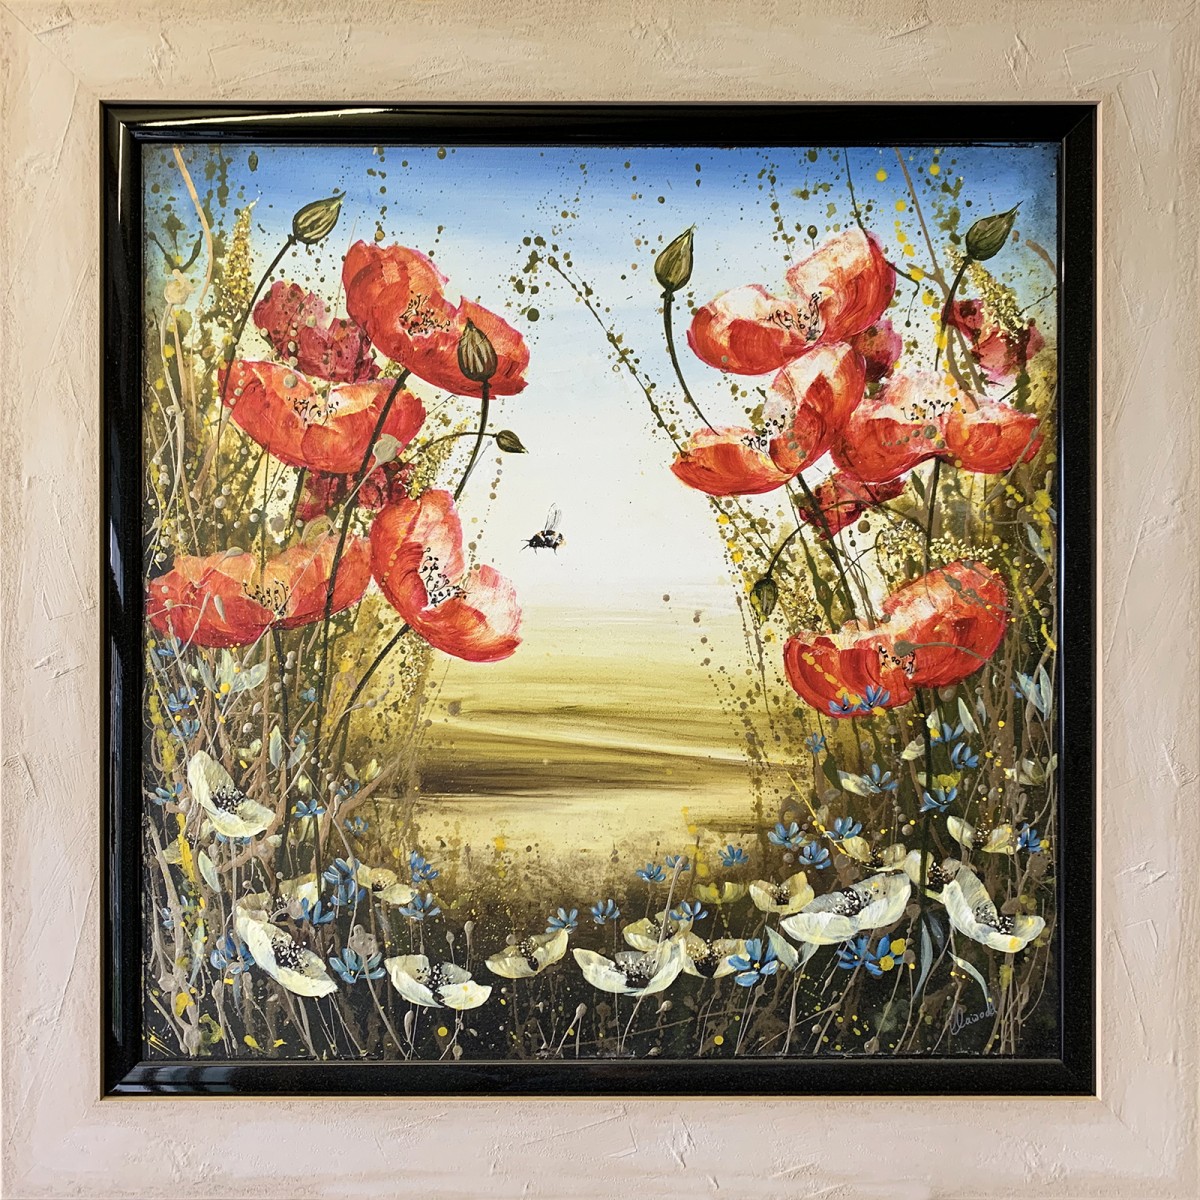 Contemporary Design Framed Watercolour Flower Painting Beautiful Fine Art Painting With Bees Small Original Red Poppies Unique Gift